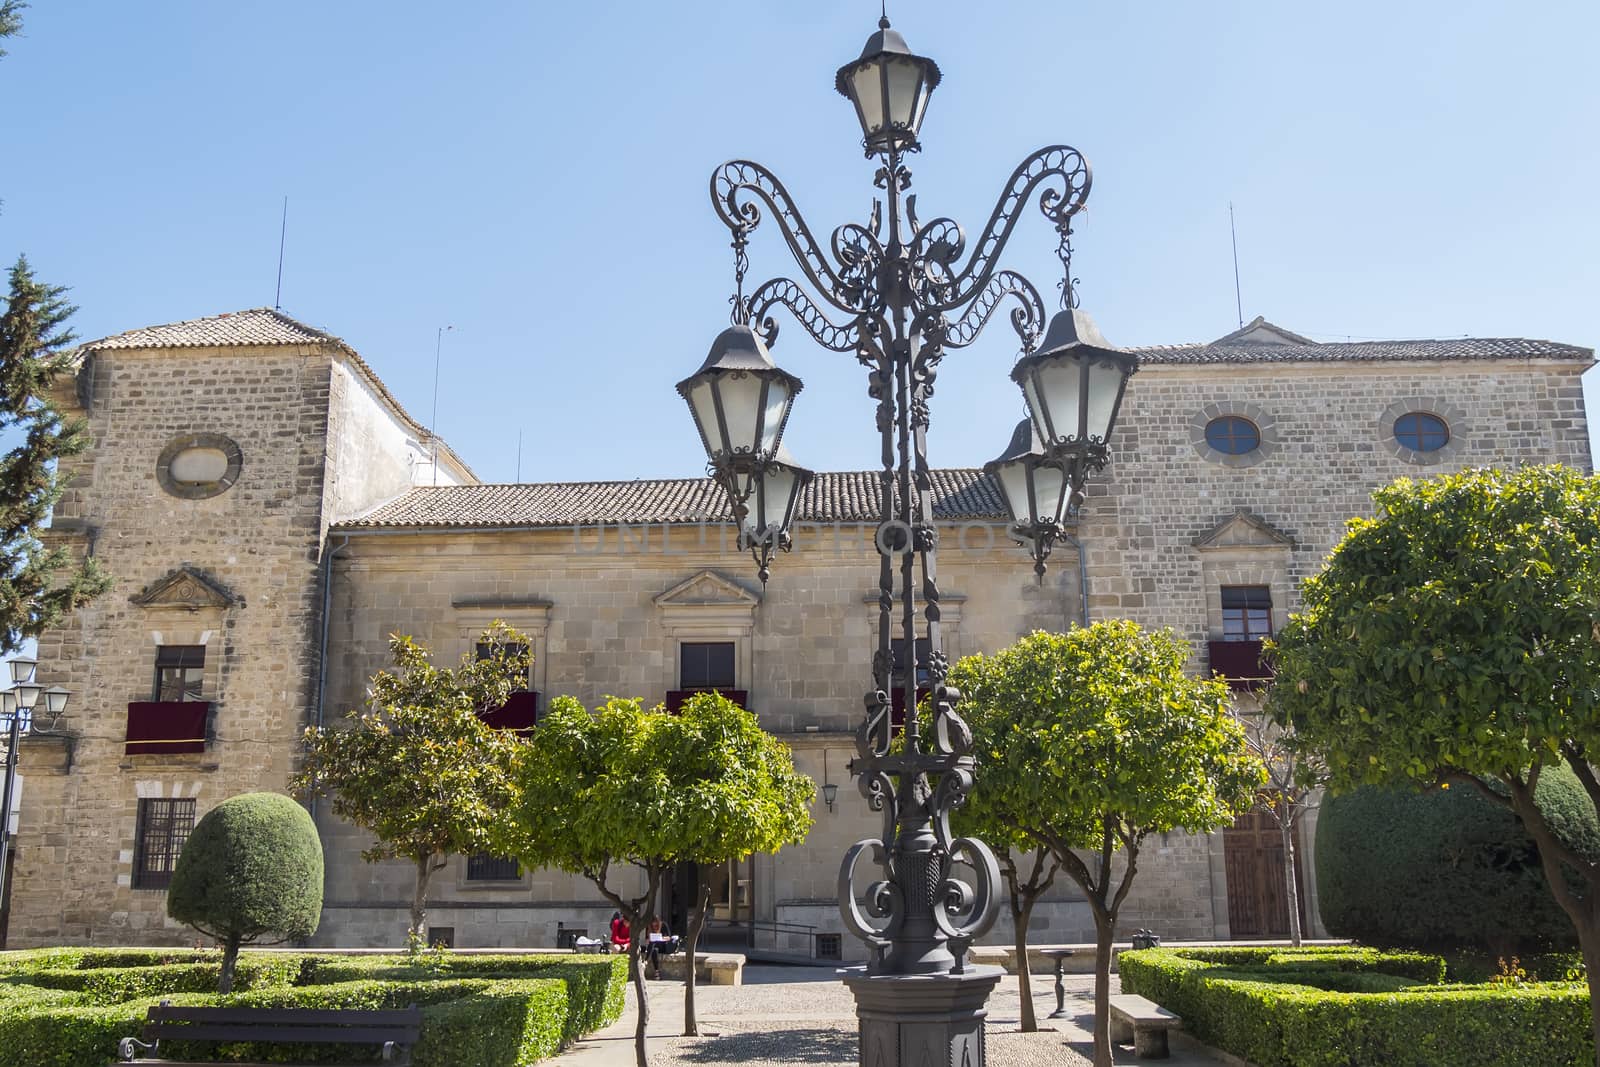 Vazquez de Molina Palace (Palace of the Chains), Ubeda, Spain by max8xam